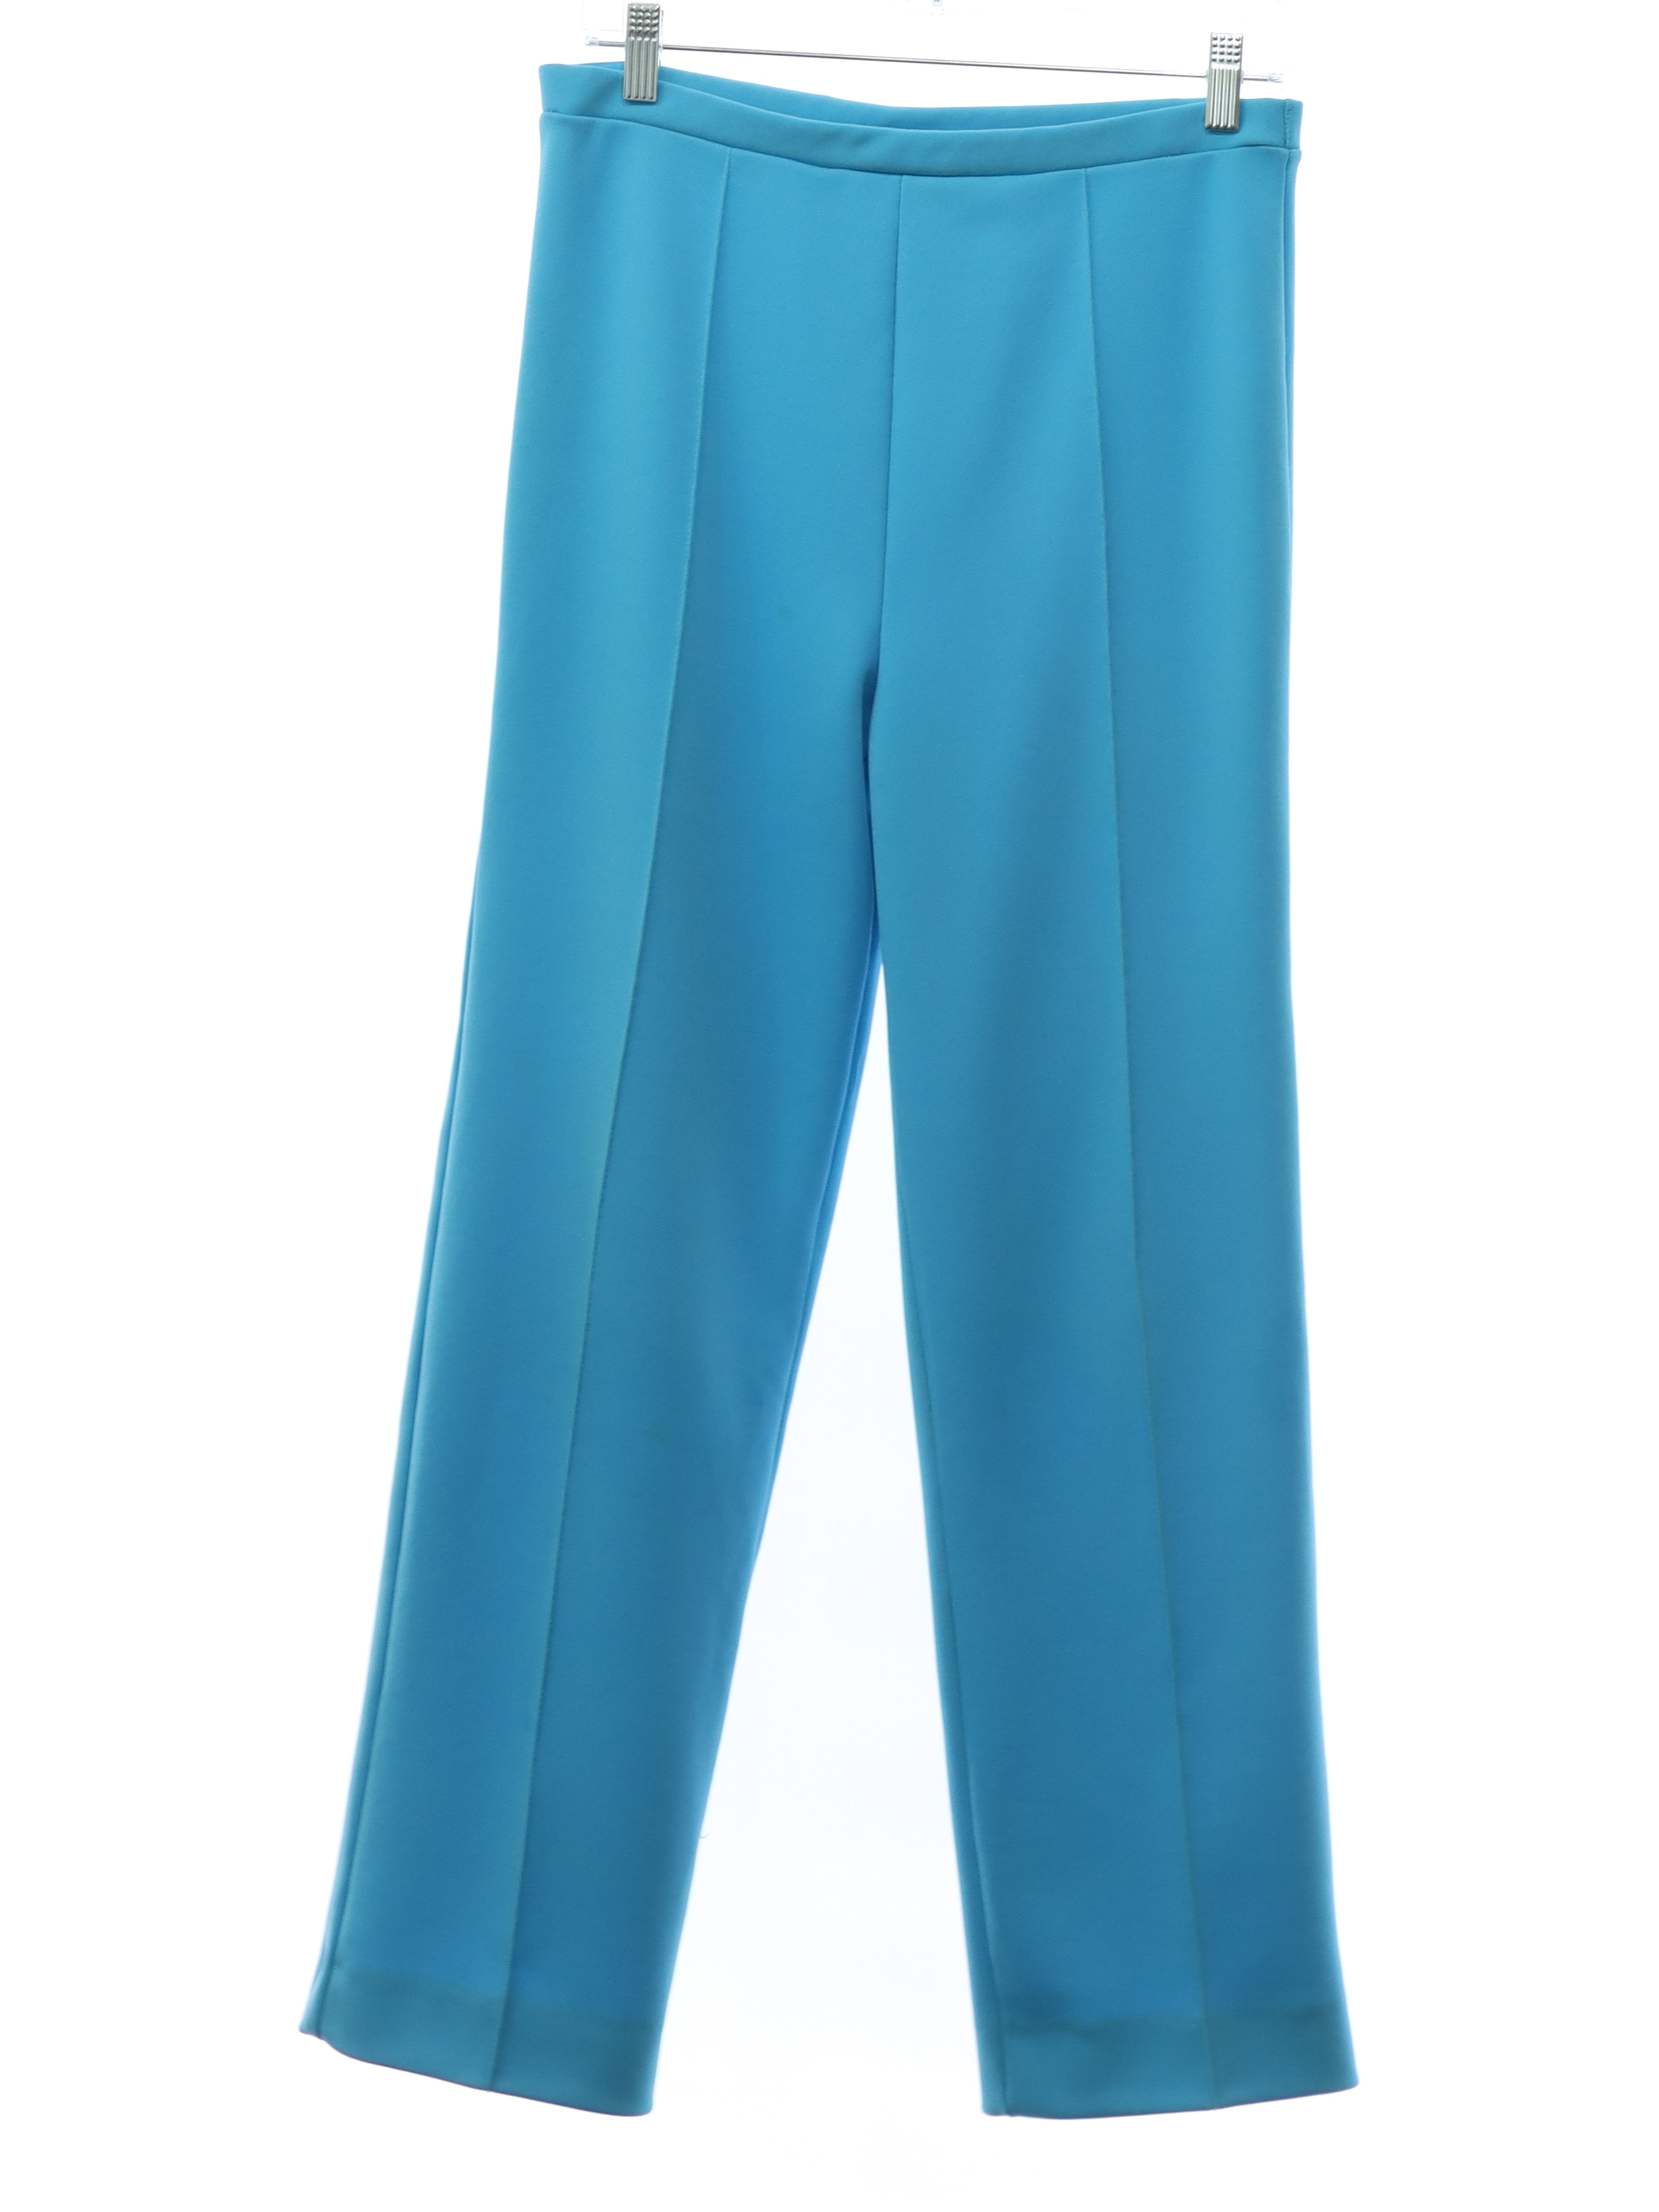 Vera Seventies Vintage Pants: Late 70s or early 80s -Vera- Womens sky blue polyester  knit pants. Classic style with stitched creased straight legs, banded pull  on waistband, no pockets. Faint light brown